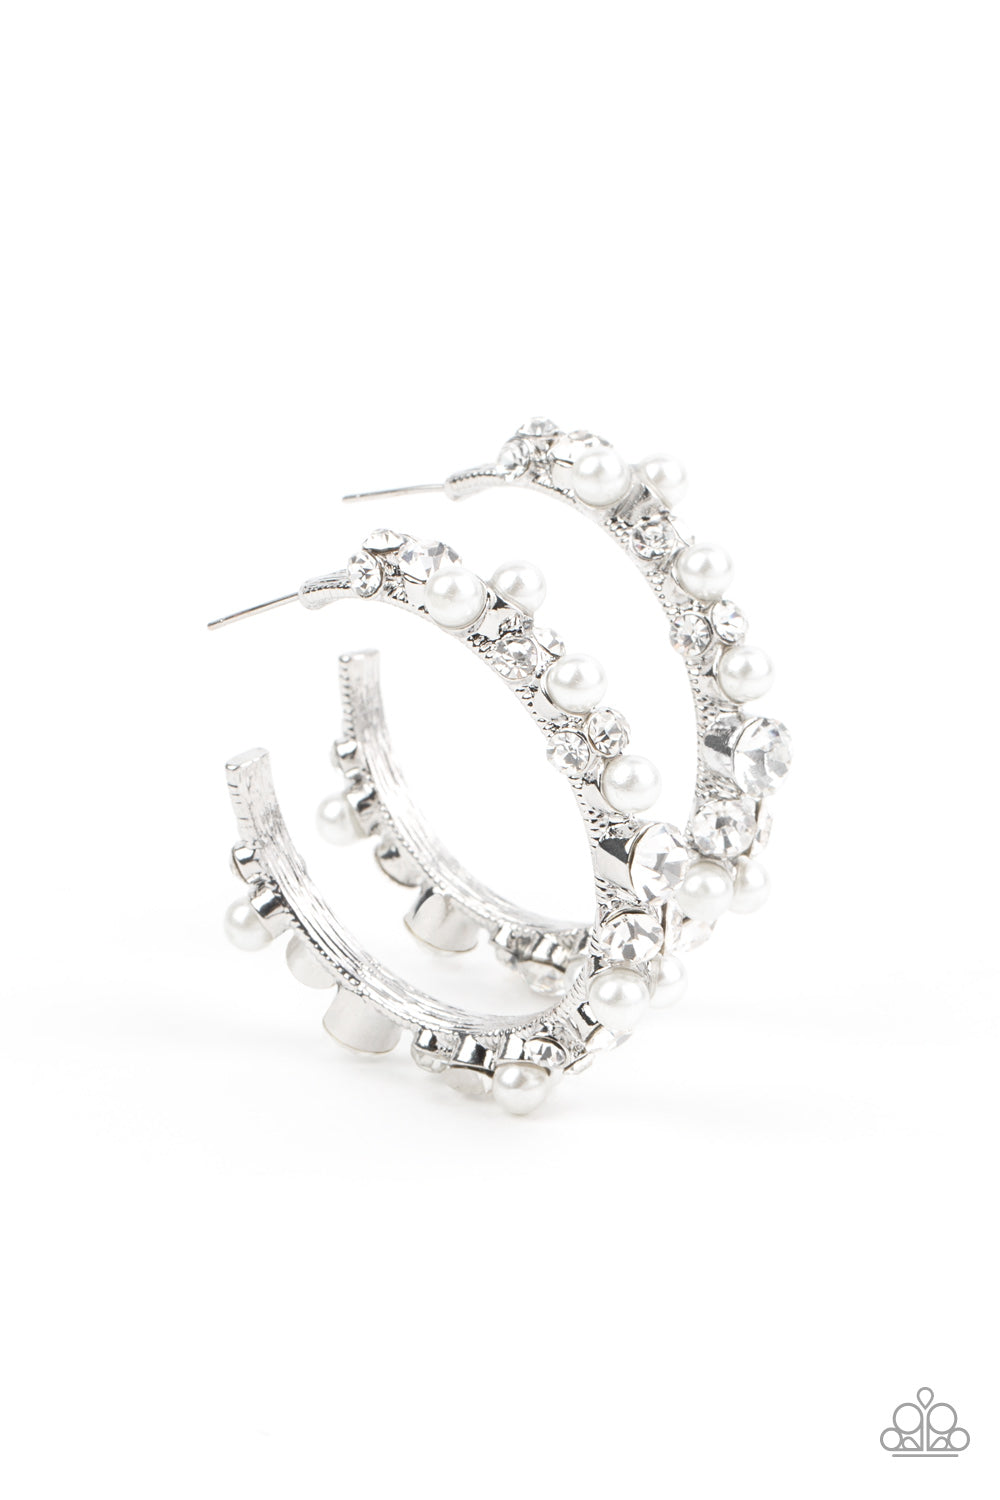 Let There Be SOCIALITE White Earrings Sept 2021 Life of the Party Exclusive - Princess Glam Shop